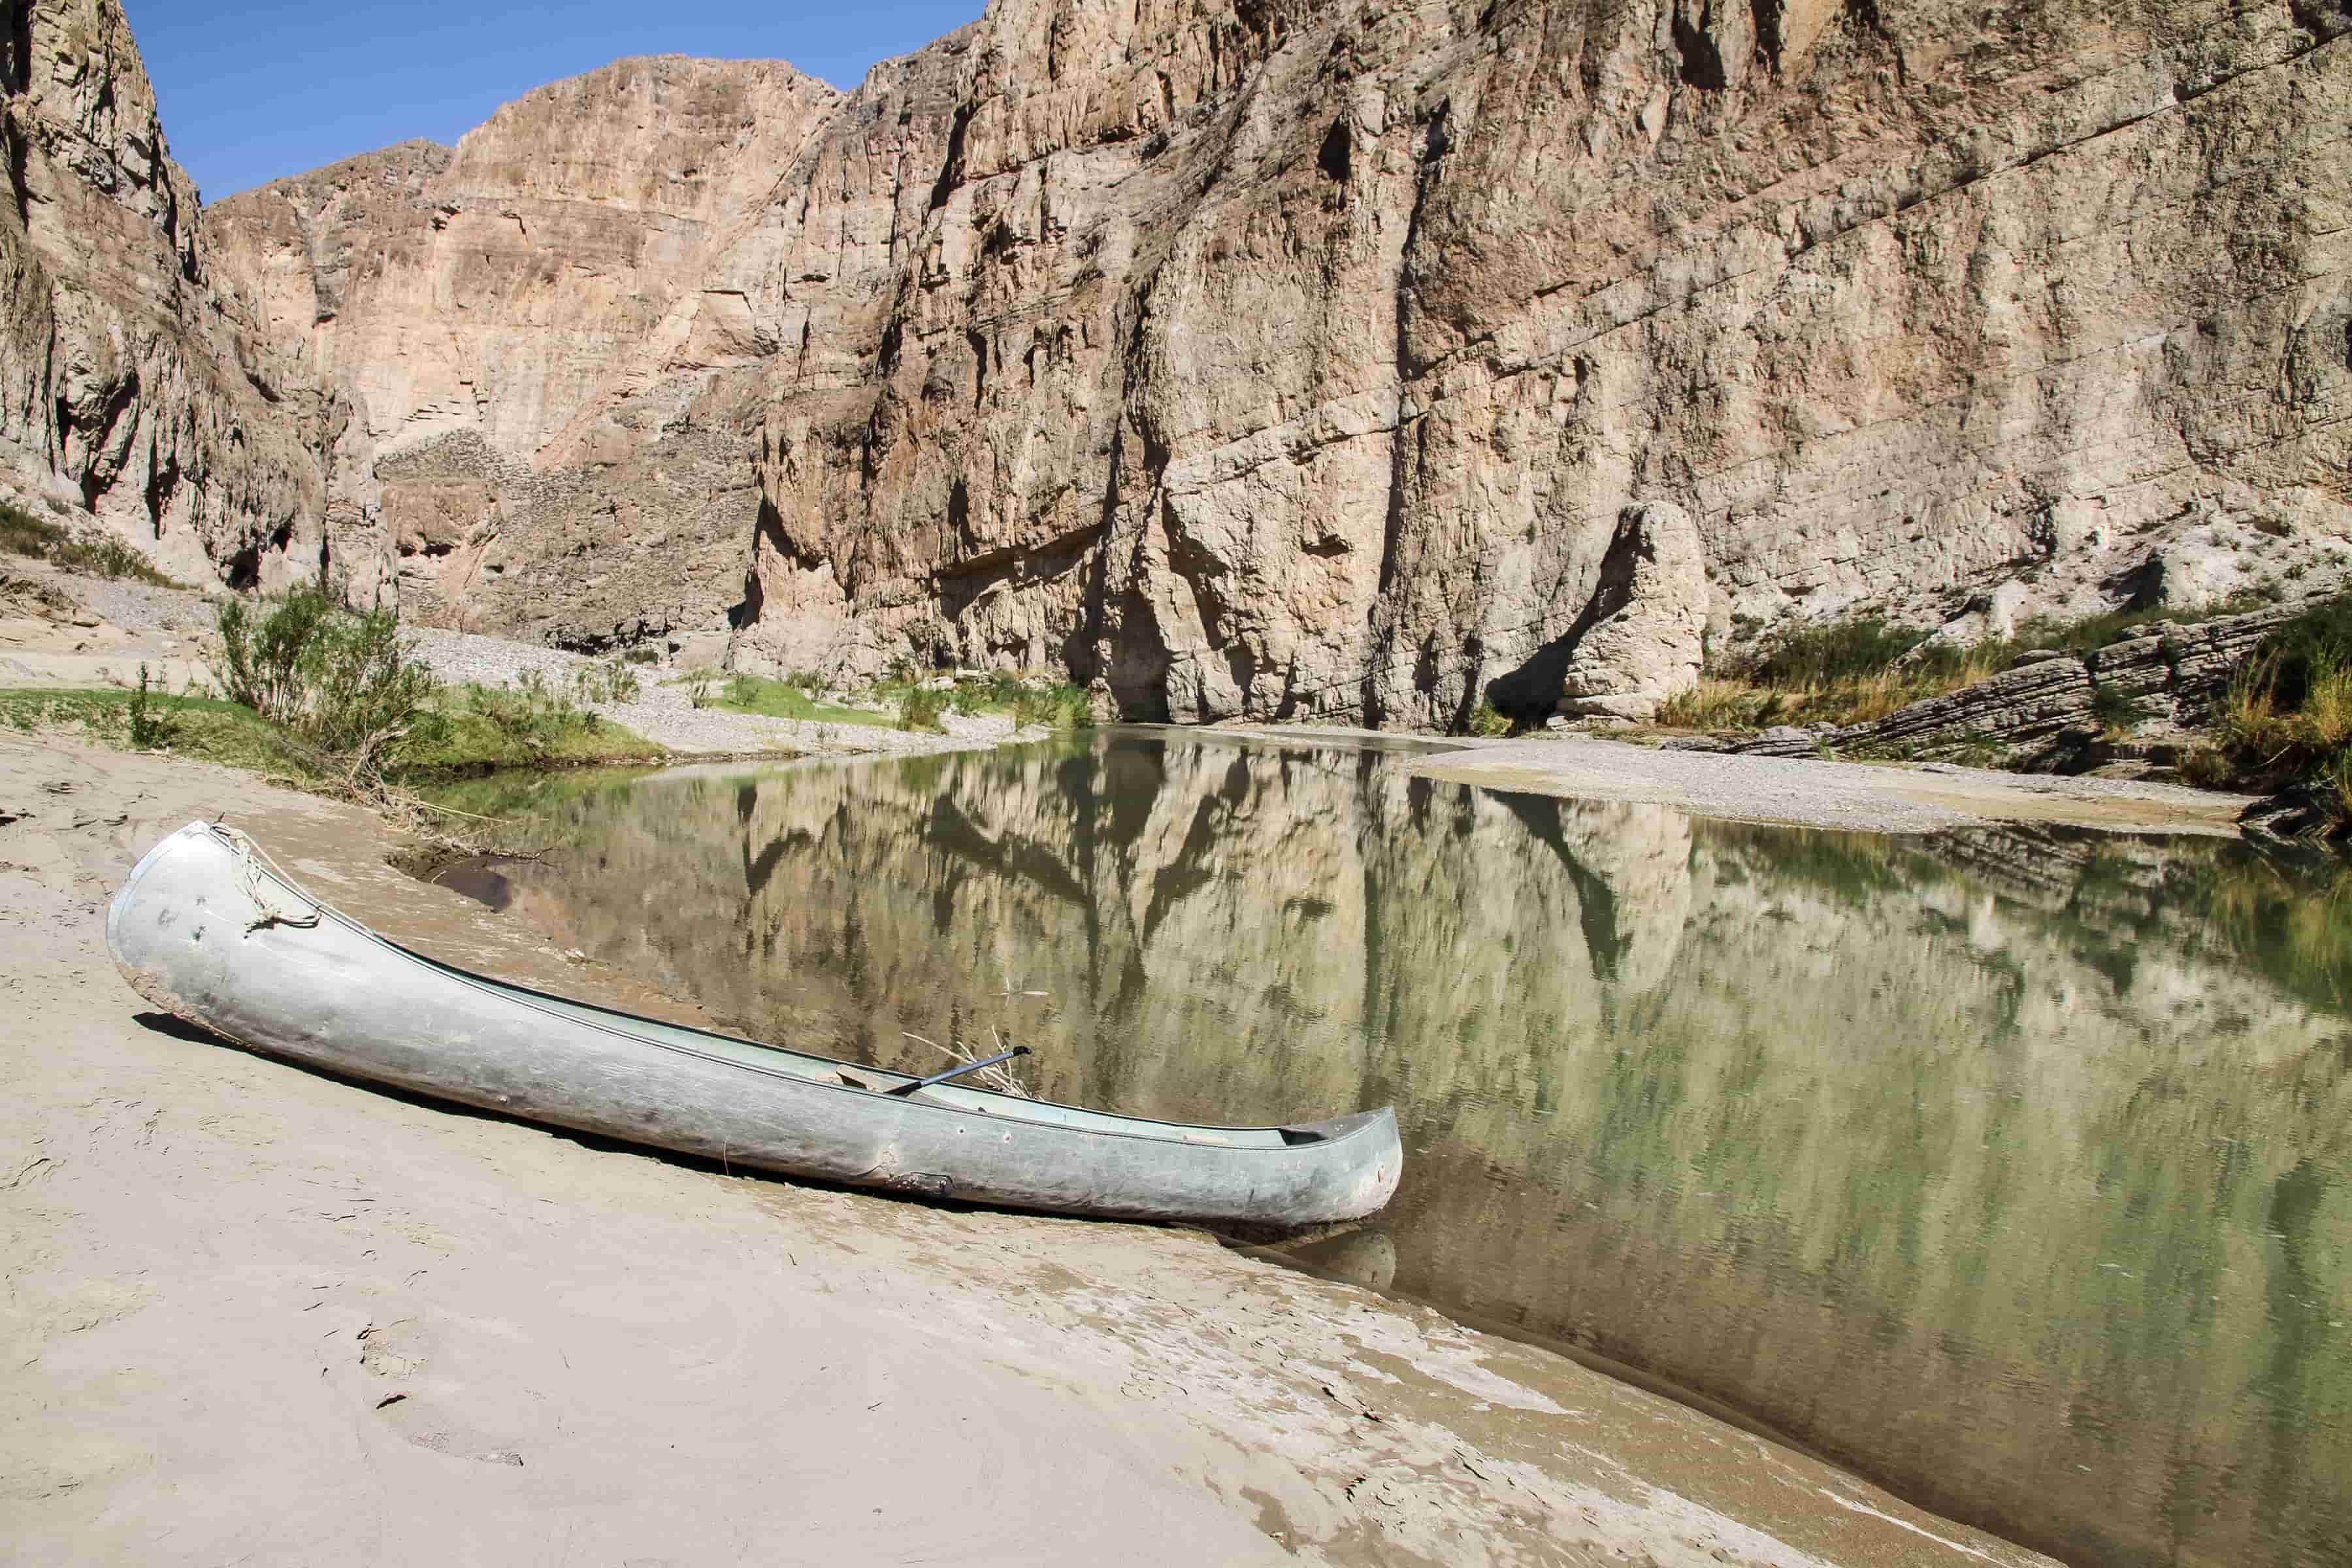 BREAKING Former River Guide Falls to his Death in Big Bend